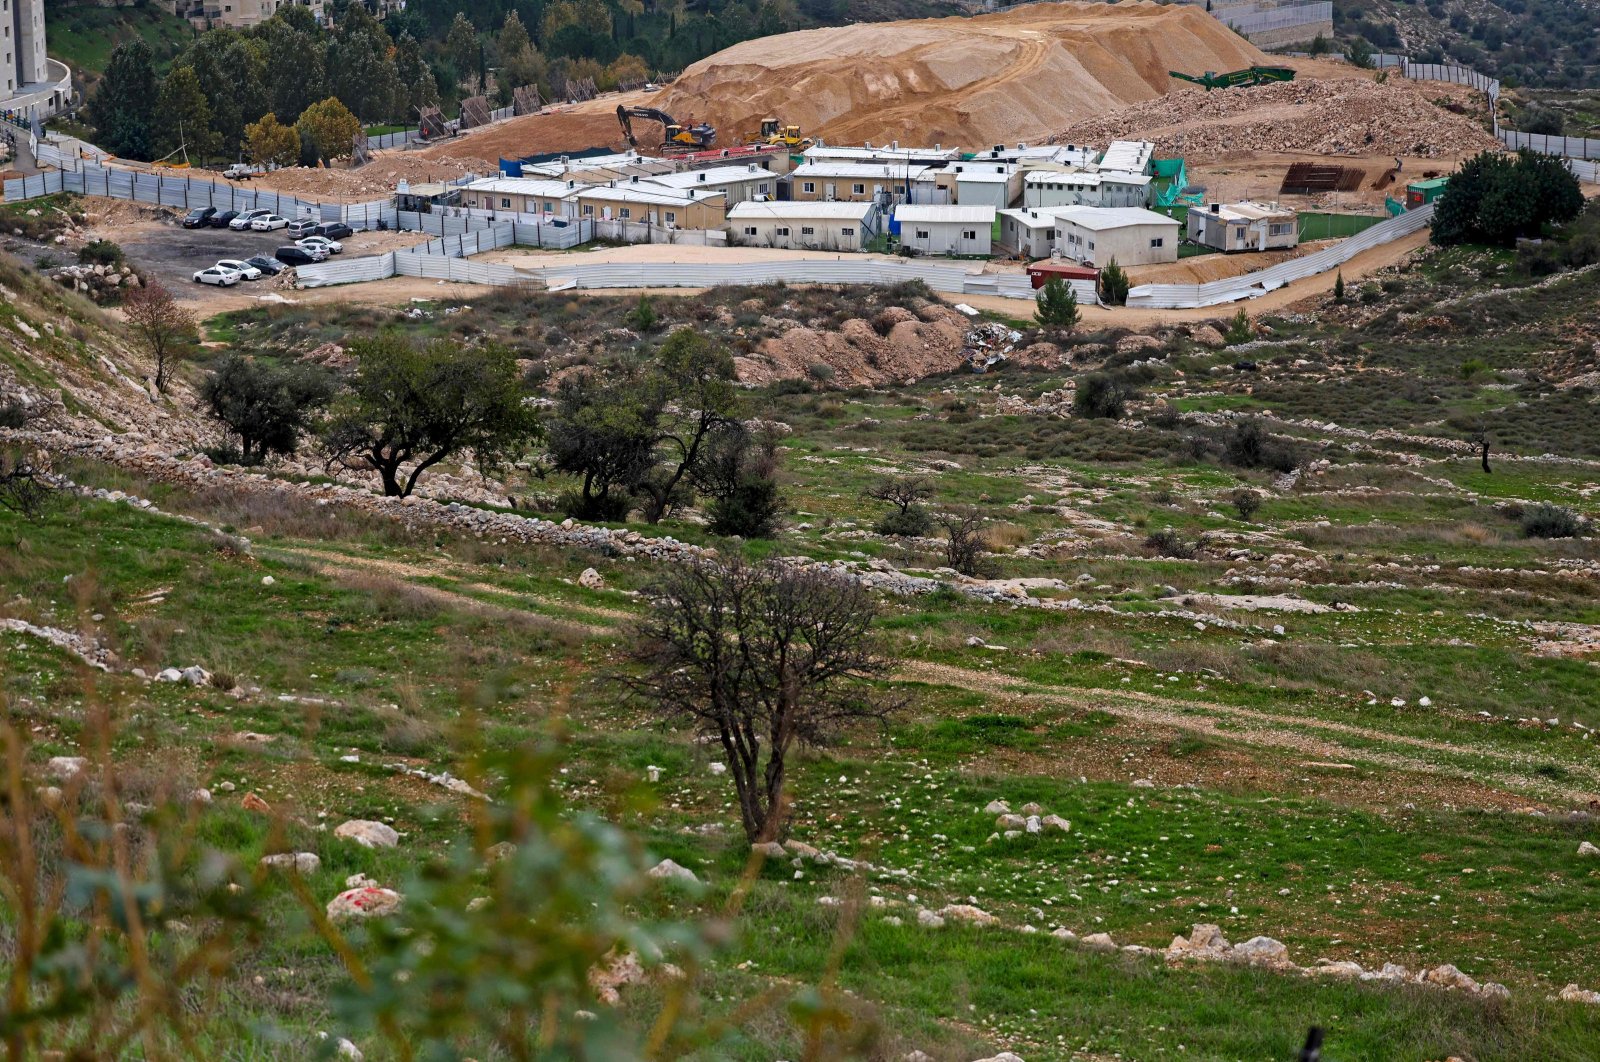 EU financial institutions fund illegal Jewish settlements